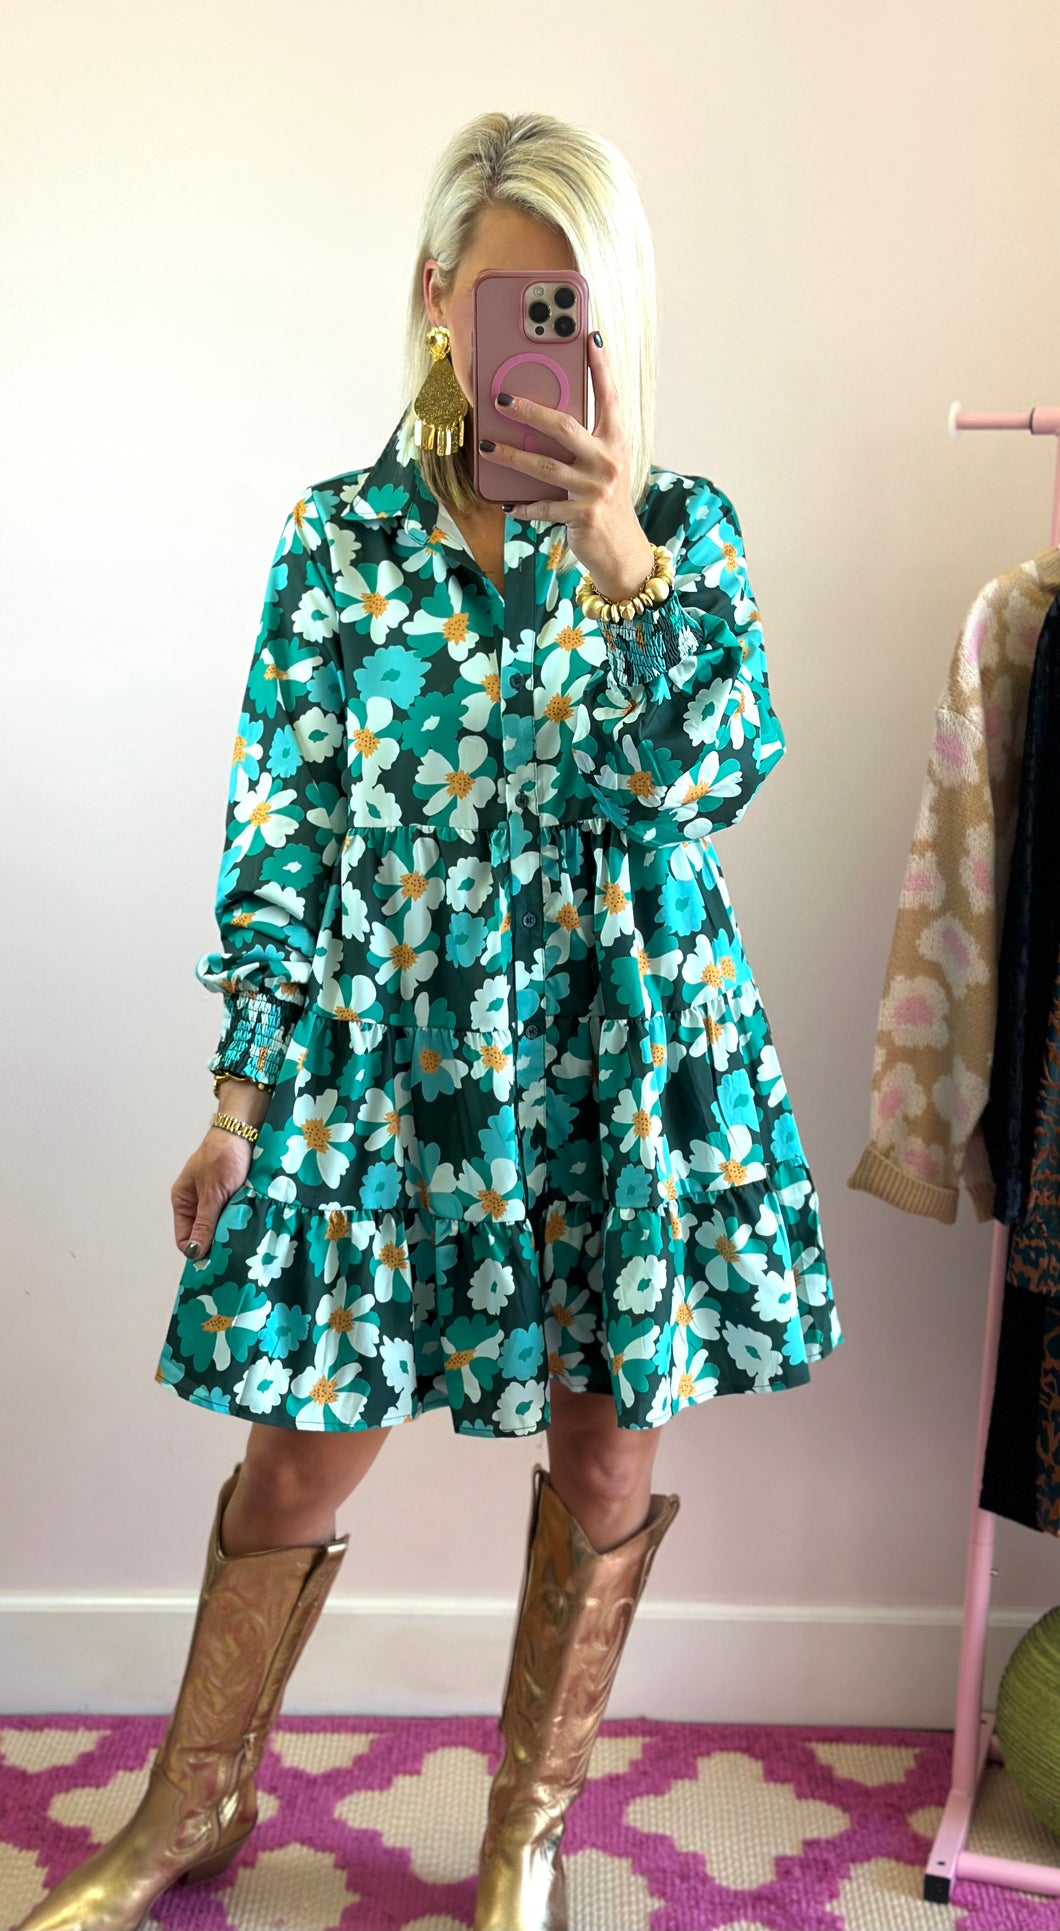 The Shades of Green Floral Dress